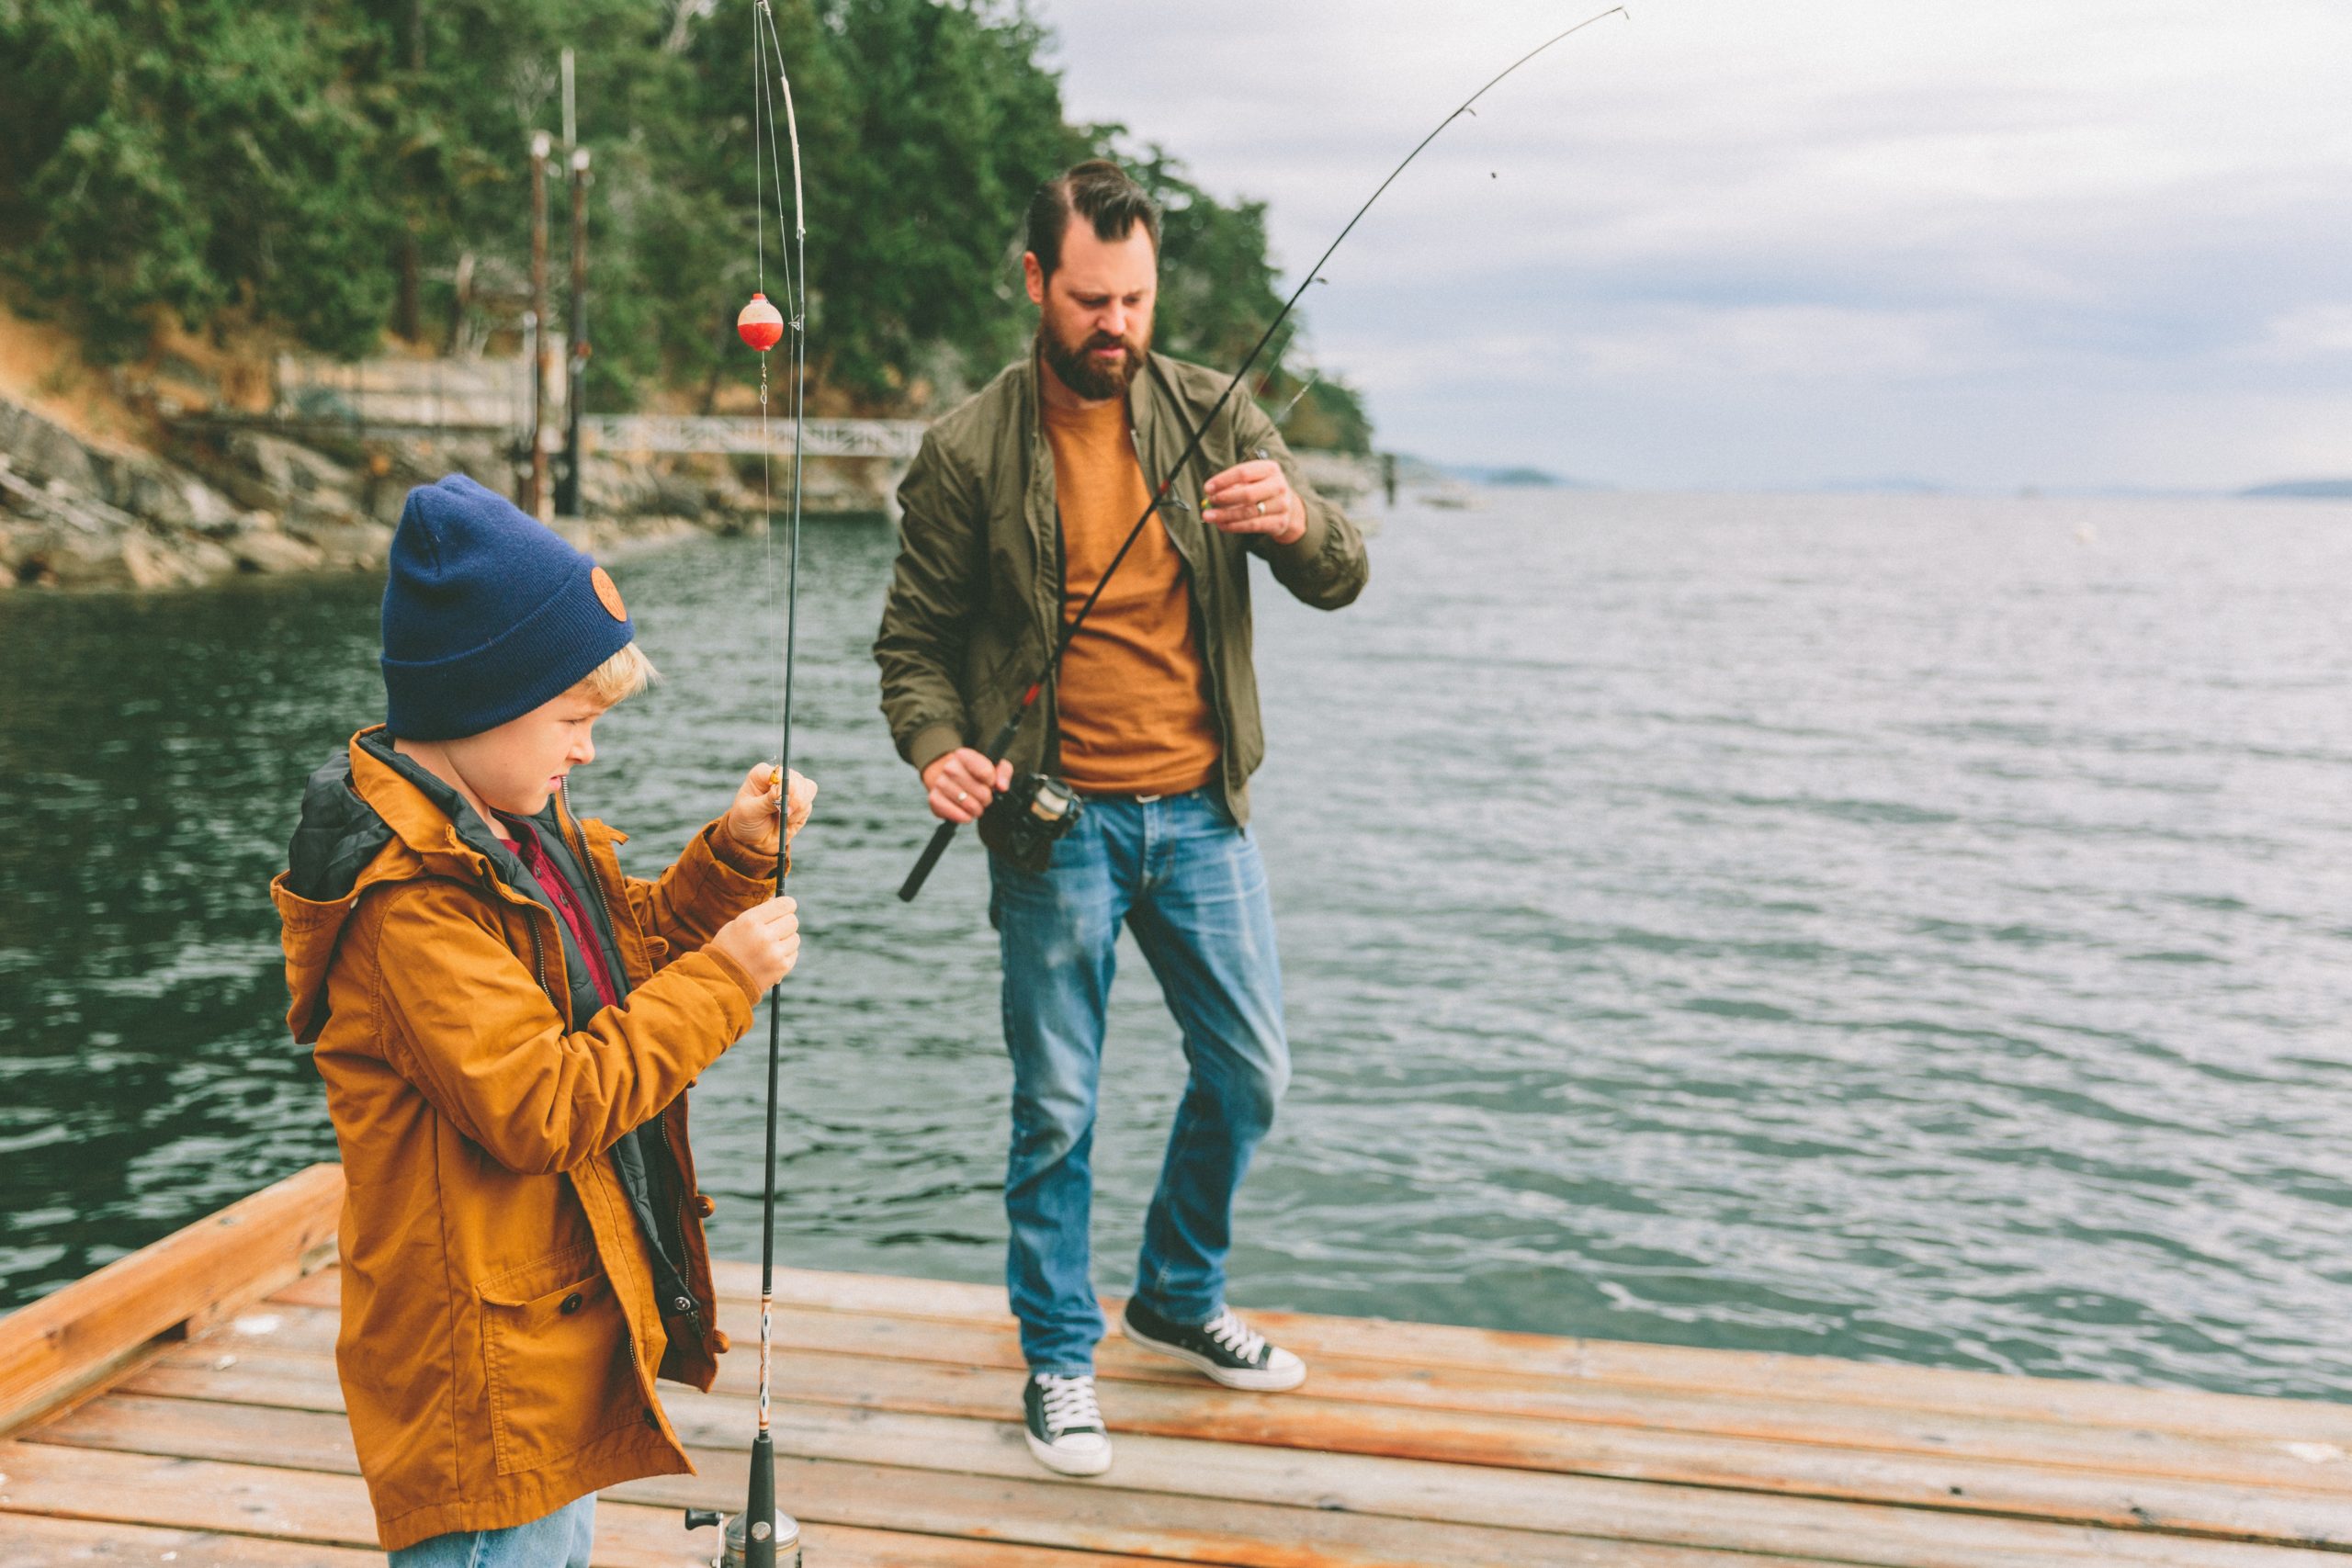 A father and son fishing off a dock at a lake